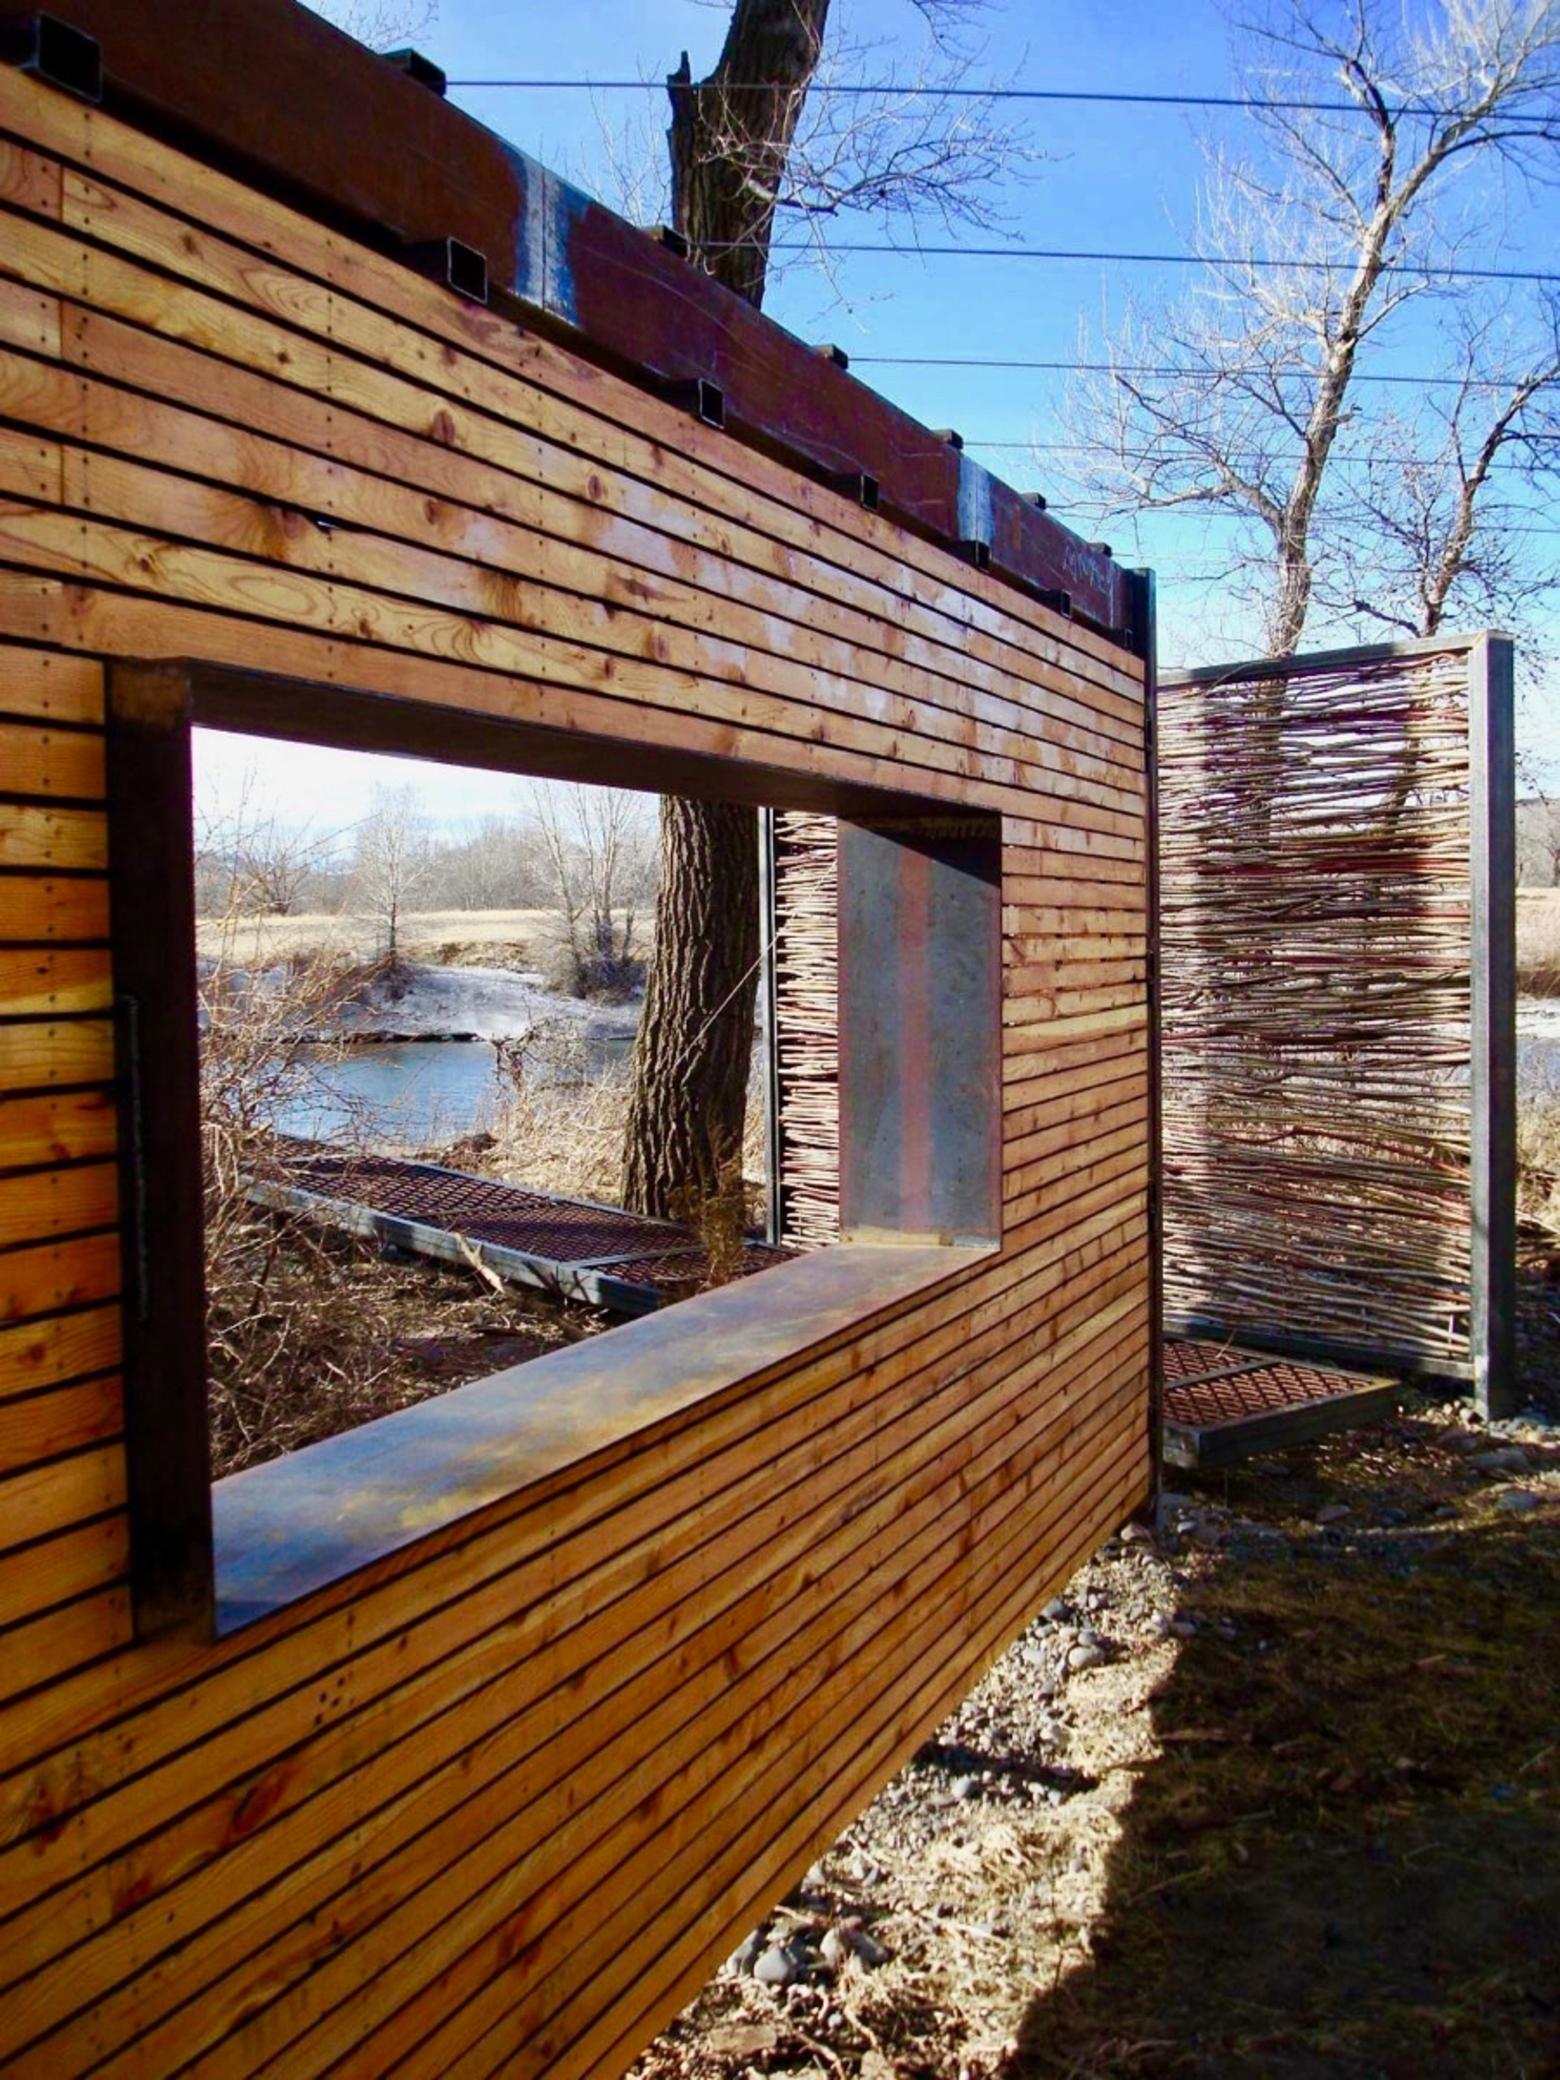 When the city of Livingston officials asked Remote Studio students to design something for the new municipal park along the Yellowstone River, they asked not for a ballpark or another active park feature but instead a place for the community to go to reflect. The structures along the quiet path function like windows into nature. Photo courtesy Remote Studio